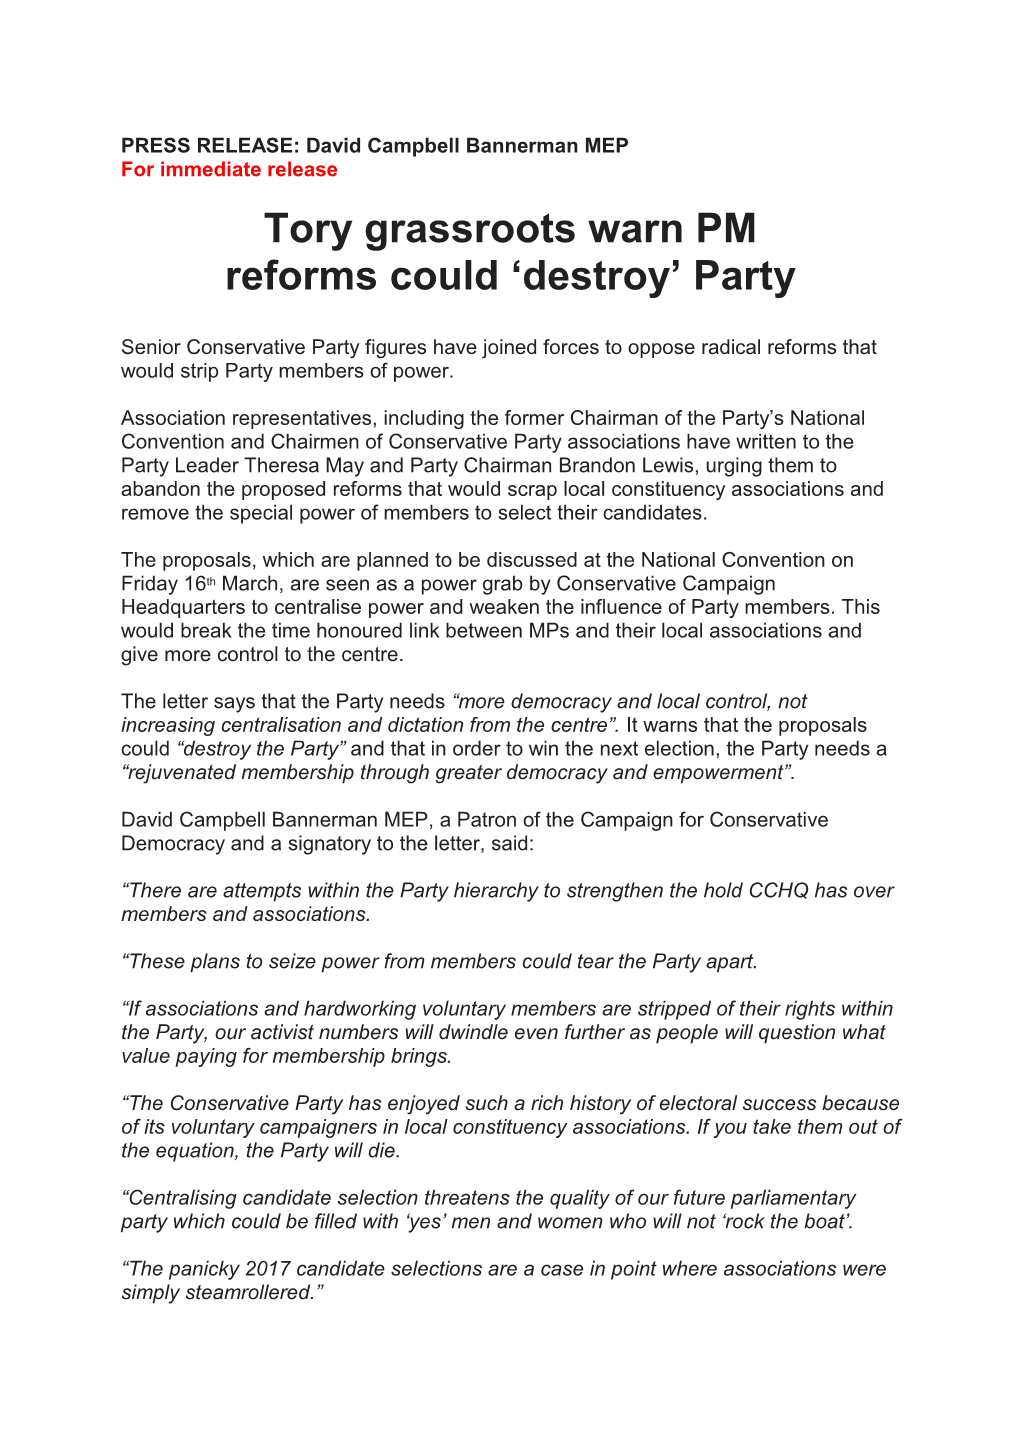 Tory Grassroots Warn PM Reforms Could 'Destroy' Party